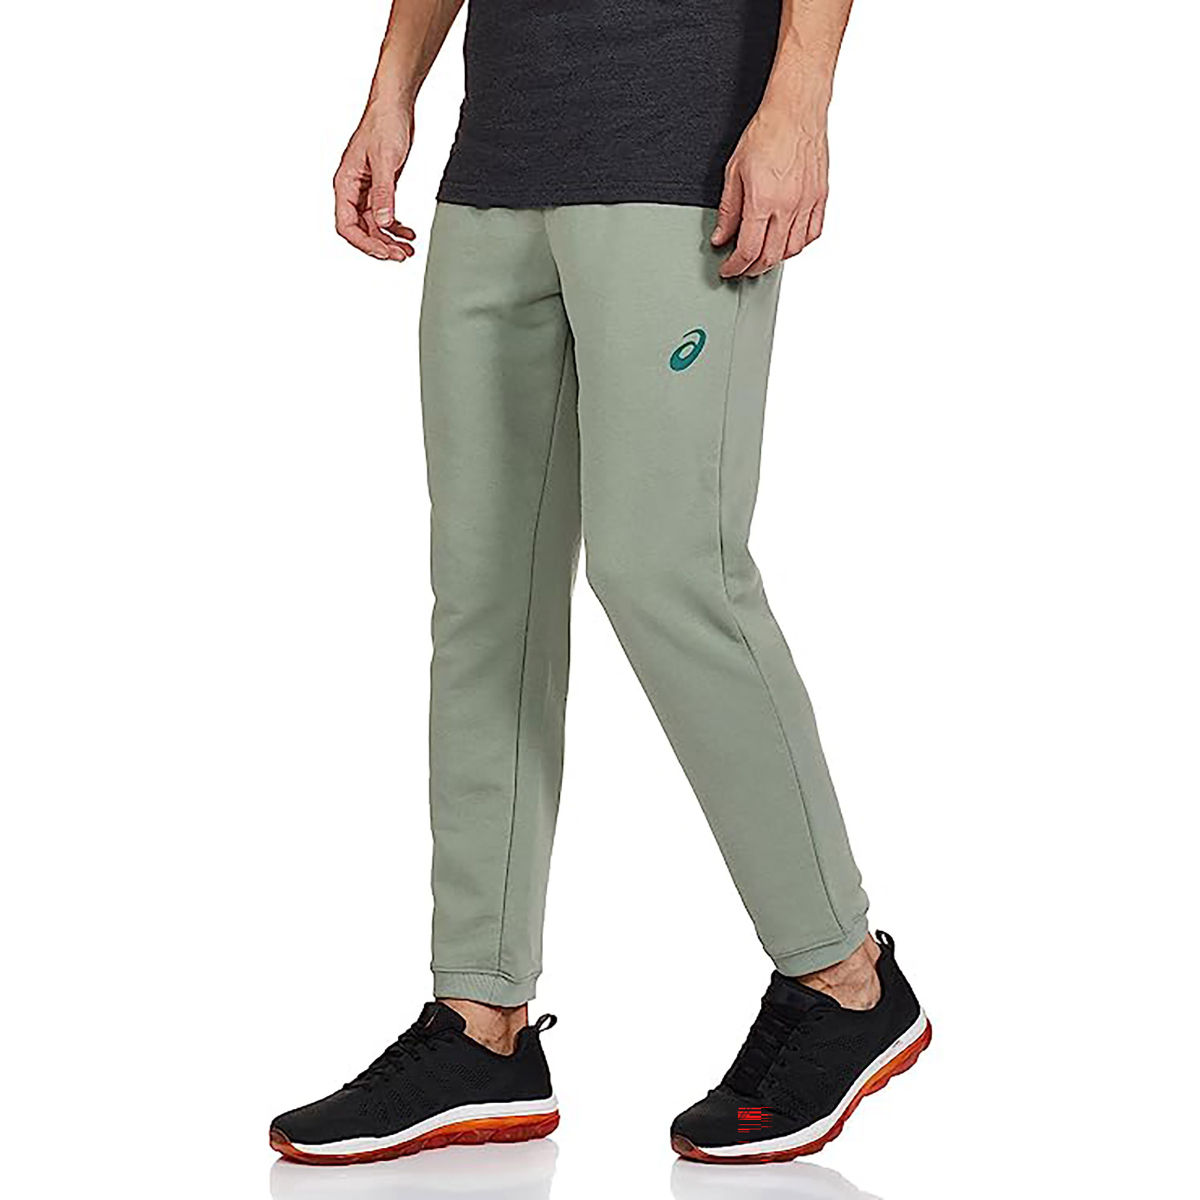 Asics Track Pant - Get Best Price from Manufacturers & Suppliers in India